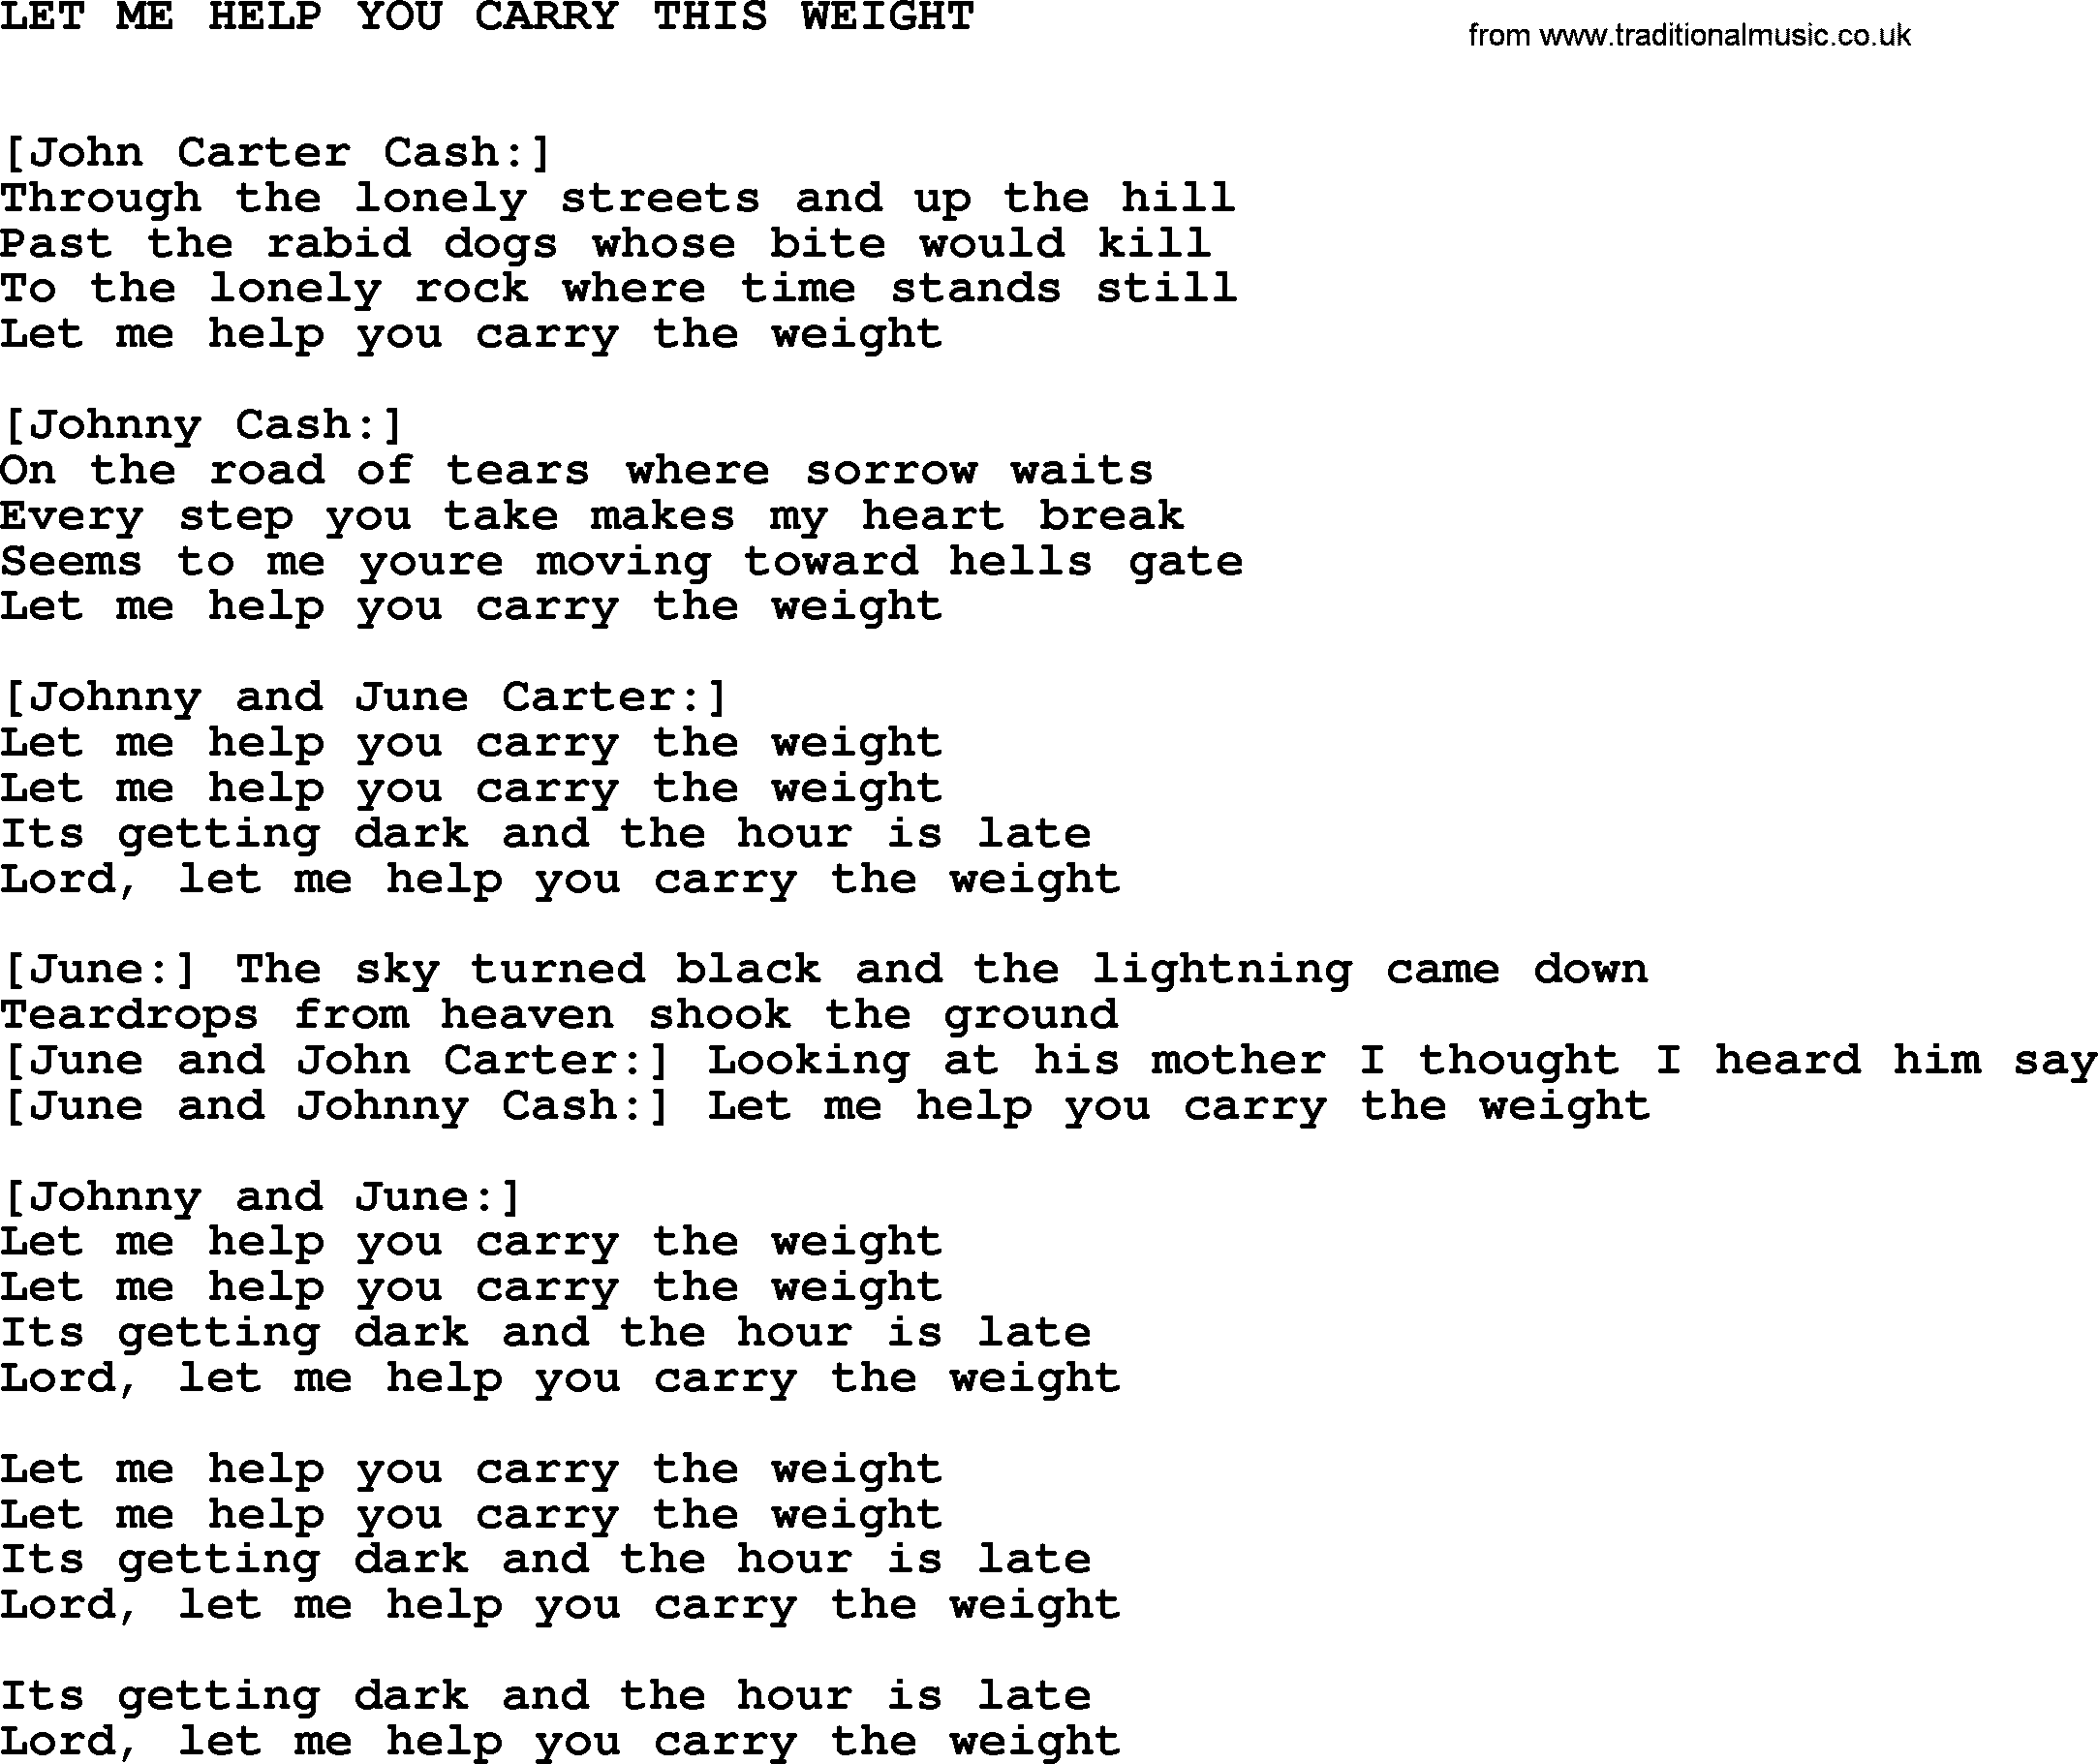 Johnny Cash song Let Me Help You Carry This Weight.txt lyrics